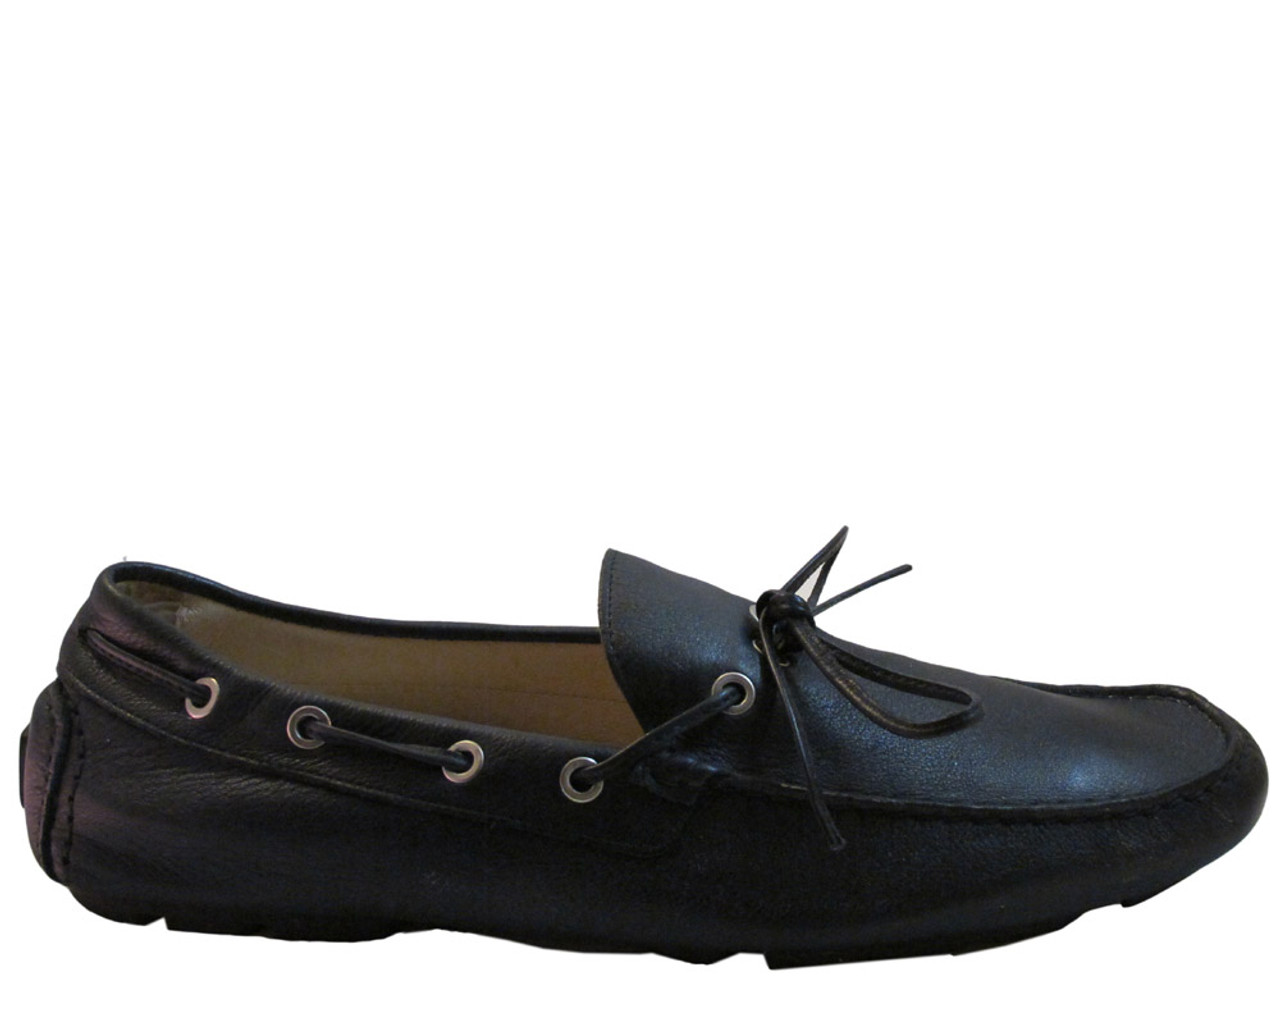 mens navy blue penny loafers